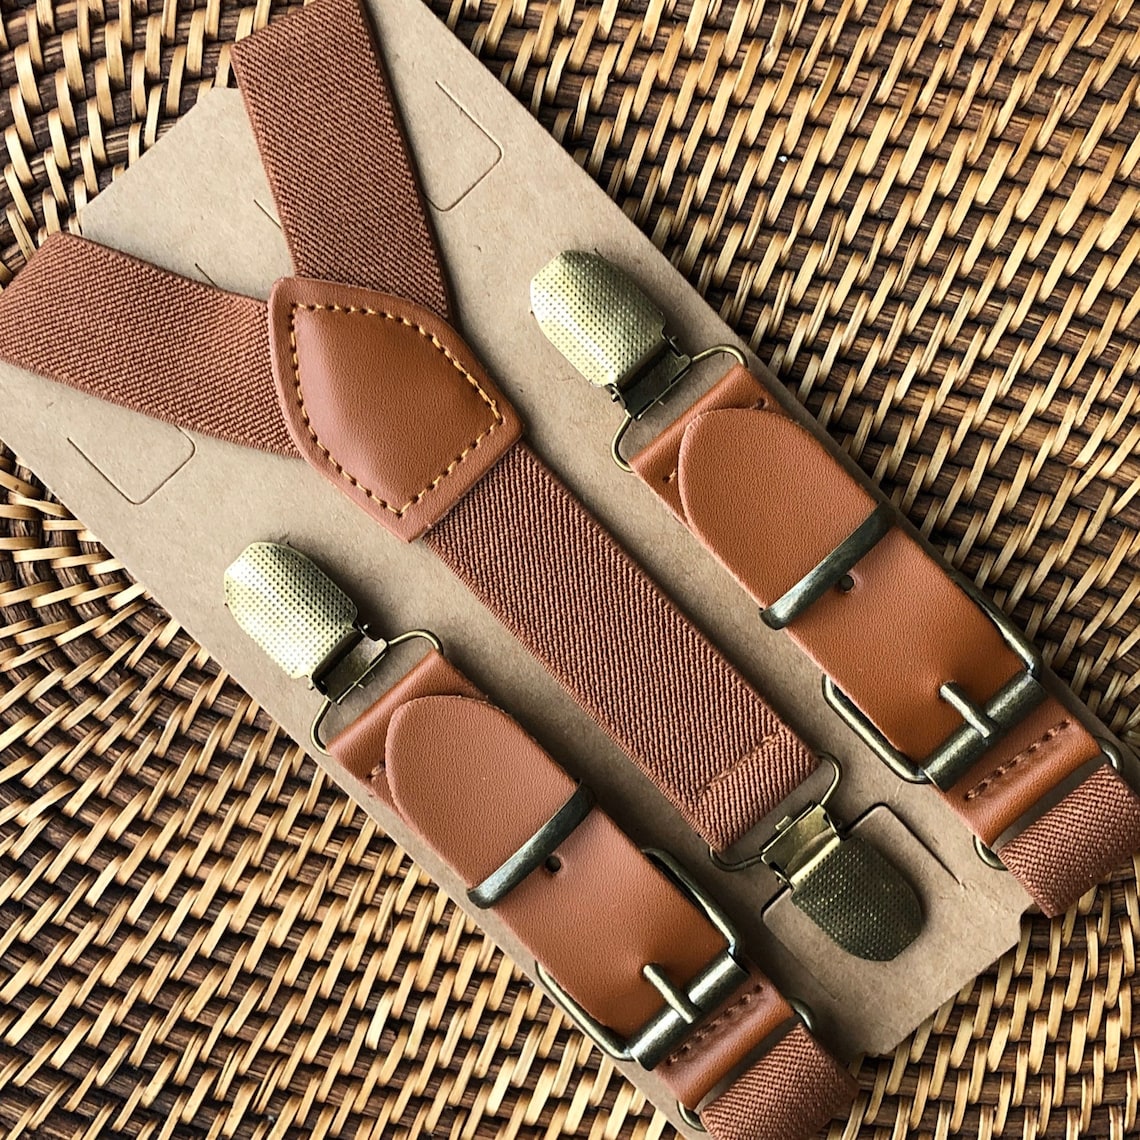 Cognac Brown Suspenders form a Y-Back for Men, Boys or Women. Bronze clips adhere suspenders to card on a woven brown background. Perfect for Weddings, Boys, Men, Women, Ring Bearer Outfit, Gift, Groomsmen.